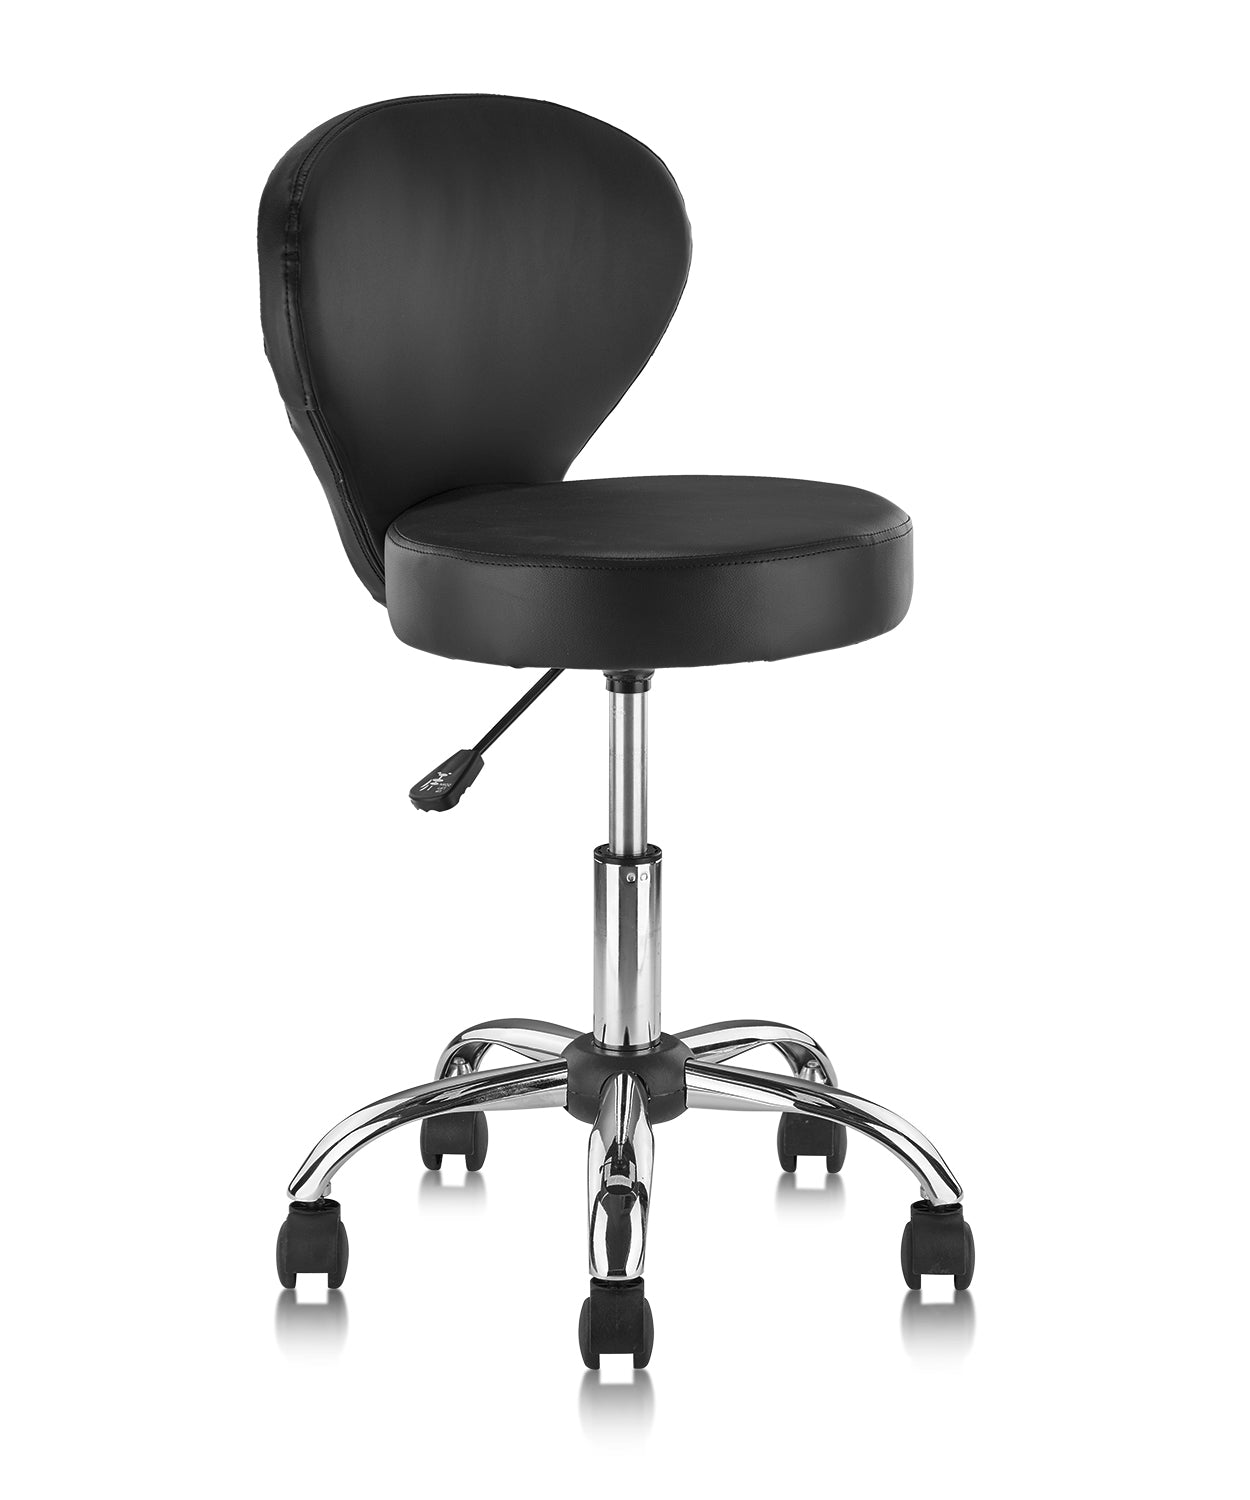 KLASIKA Drafting Chair Rolling Swivel Salon Stool with Back Support Foot Rest Adjustable Hydraulic for Office Massage Facial Spa Medical Tattoo Beauty Barber